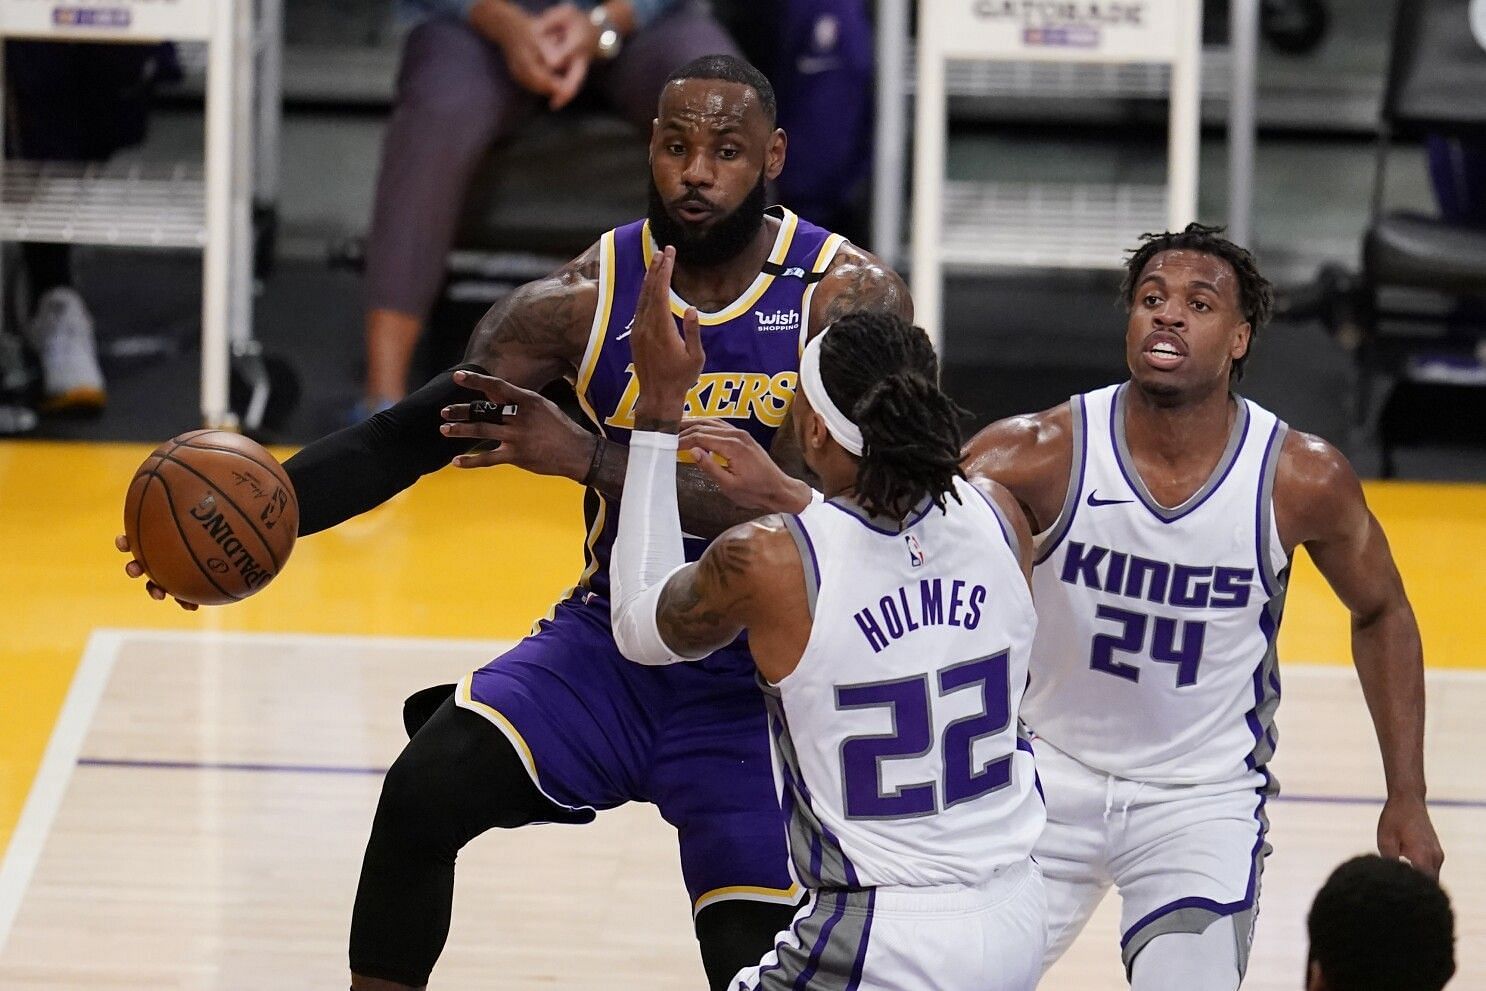 LeBron James dominated in the fourth quarter to lead the LA Lakers past the Sacramento Kings. [Photo: LA Times]